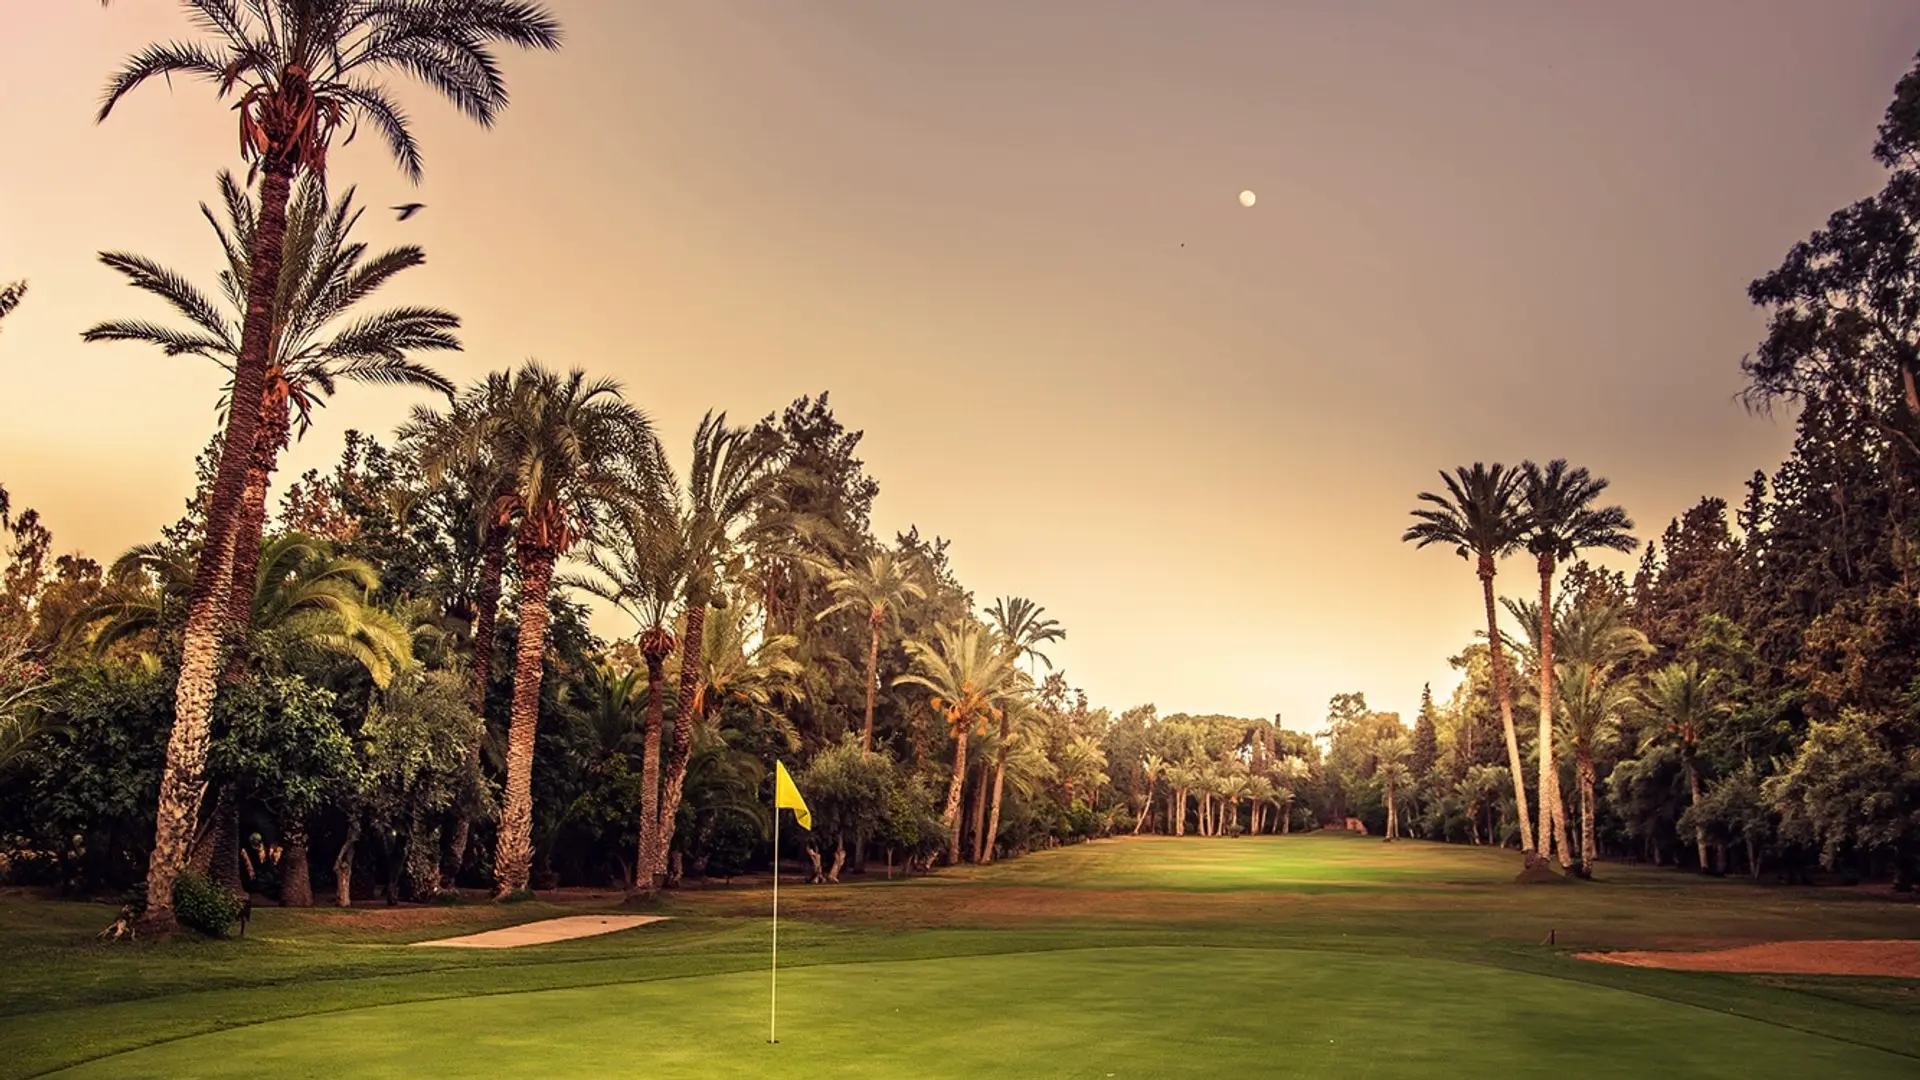 Golf field surrounded by palm trees and a yellow flag mark on the field.